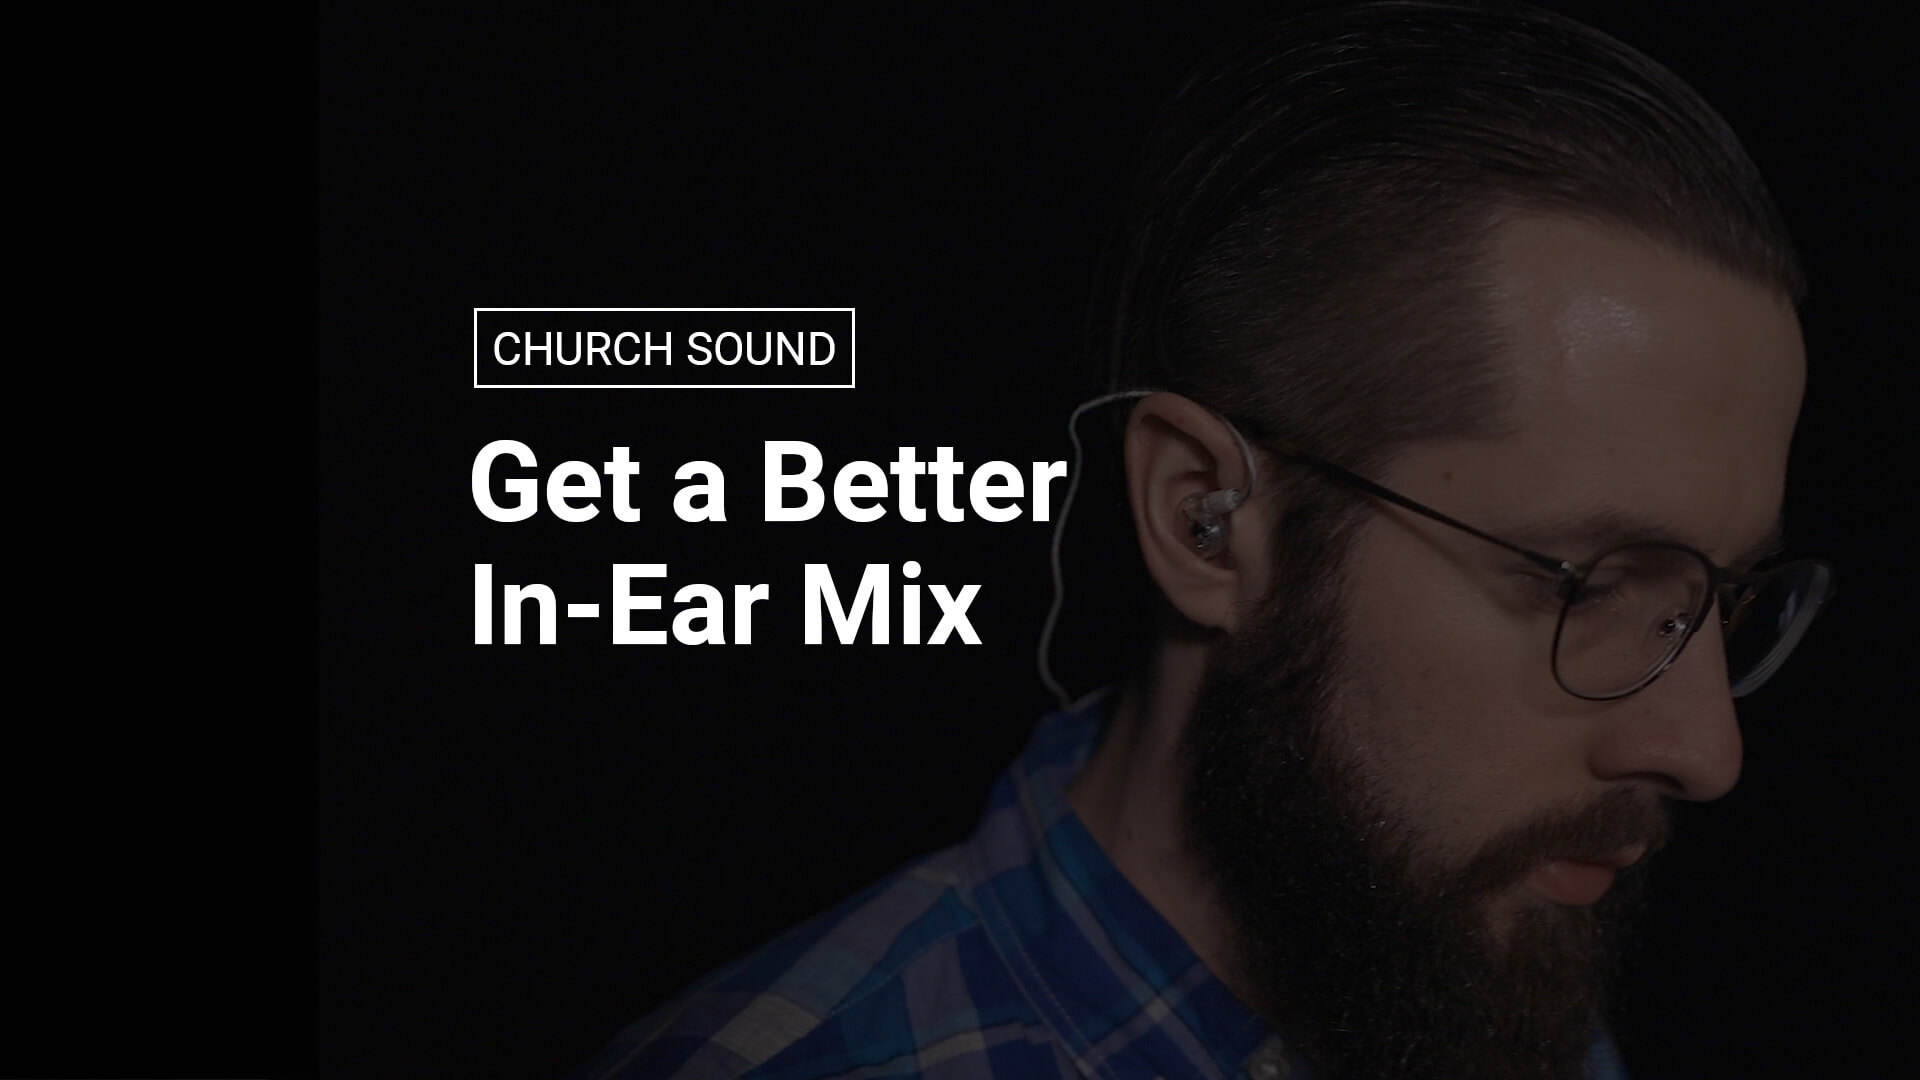 5 Tips for a Better In-Ear Mix